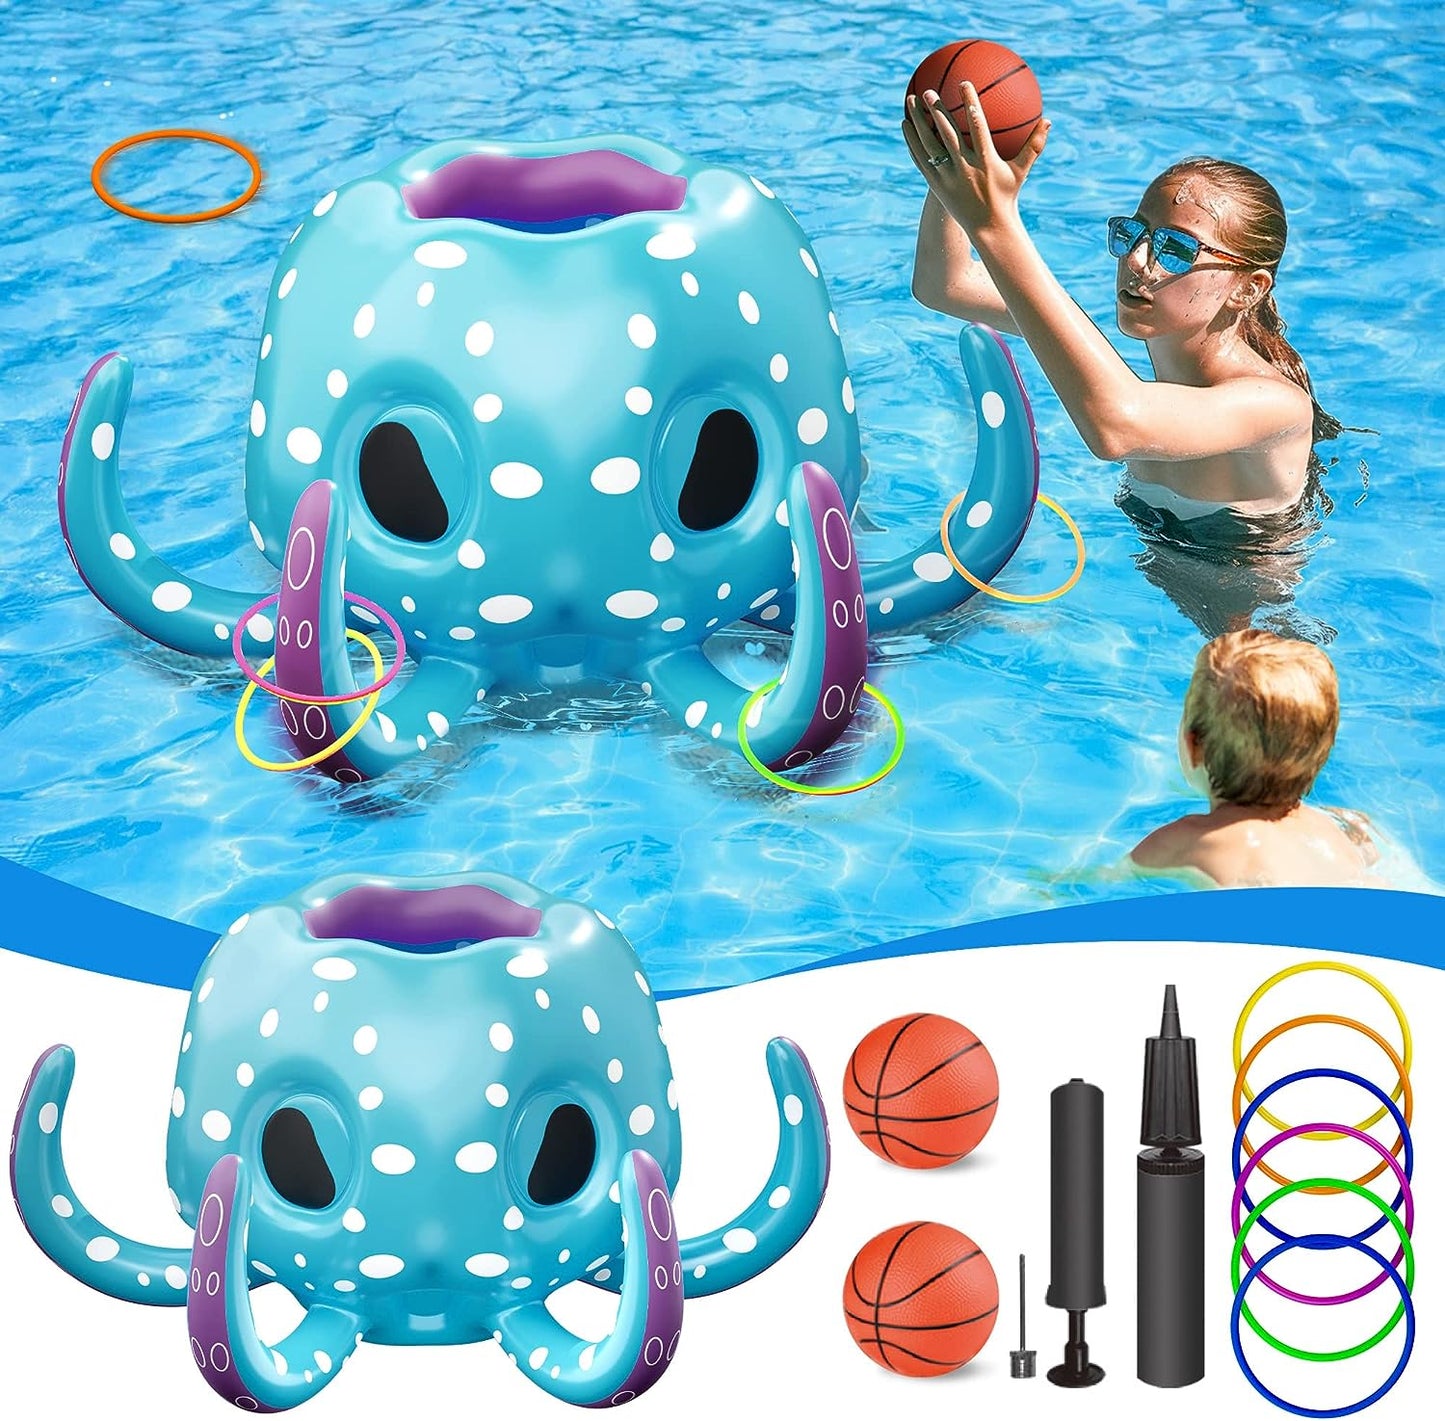 Kids Octopus Pool Toys, 2-in-1 Inflatable Basketball Hoop & Ring Toss Games, Toddler Outdoor Floating Water Fun Play, Cool Summer Swim Family Party Gift 3 4 5 6 7 8 Yr Old Boy Girl Teens